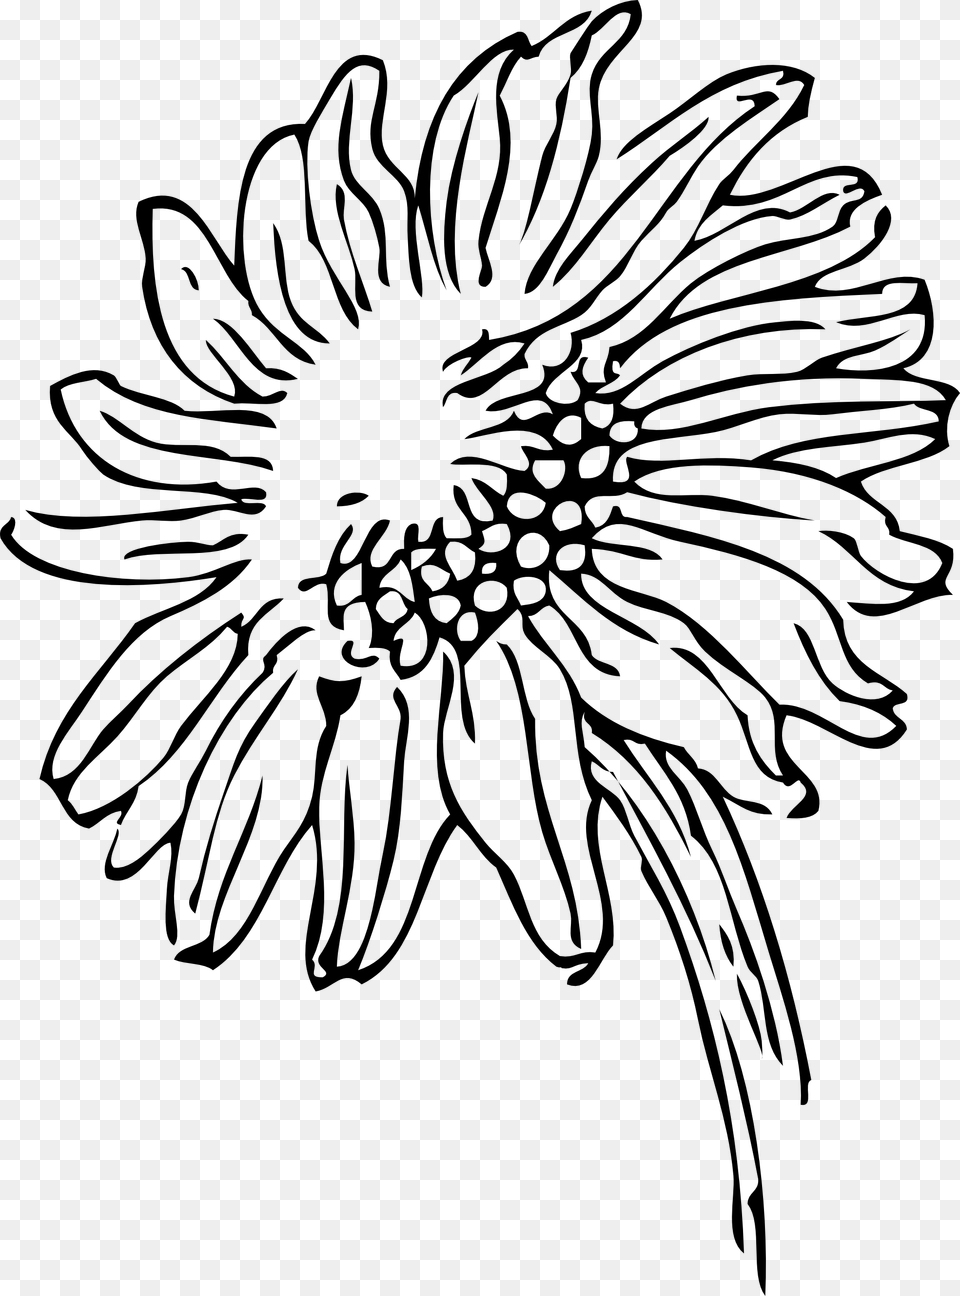 Sunflower Black And White Black And White Flower Border, Daisy, Plant, Art, Stencil Png